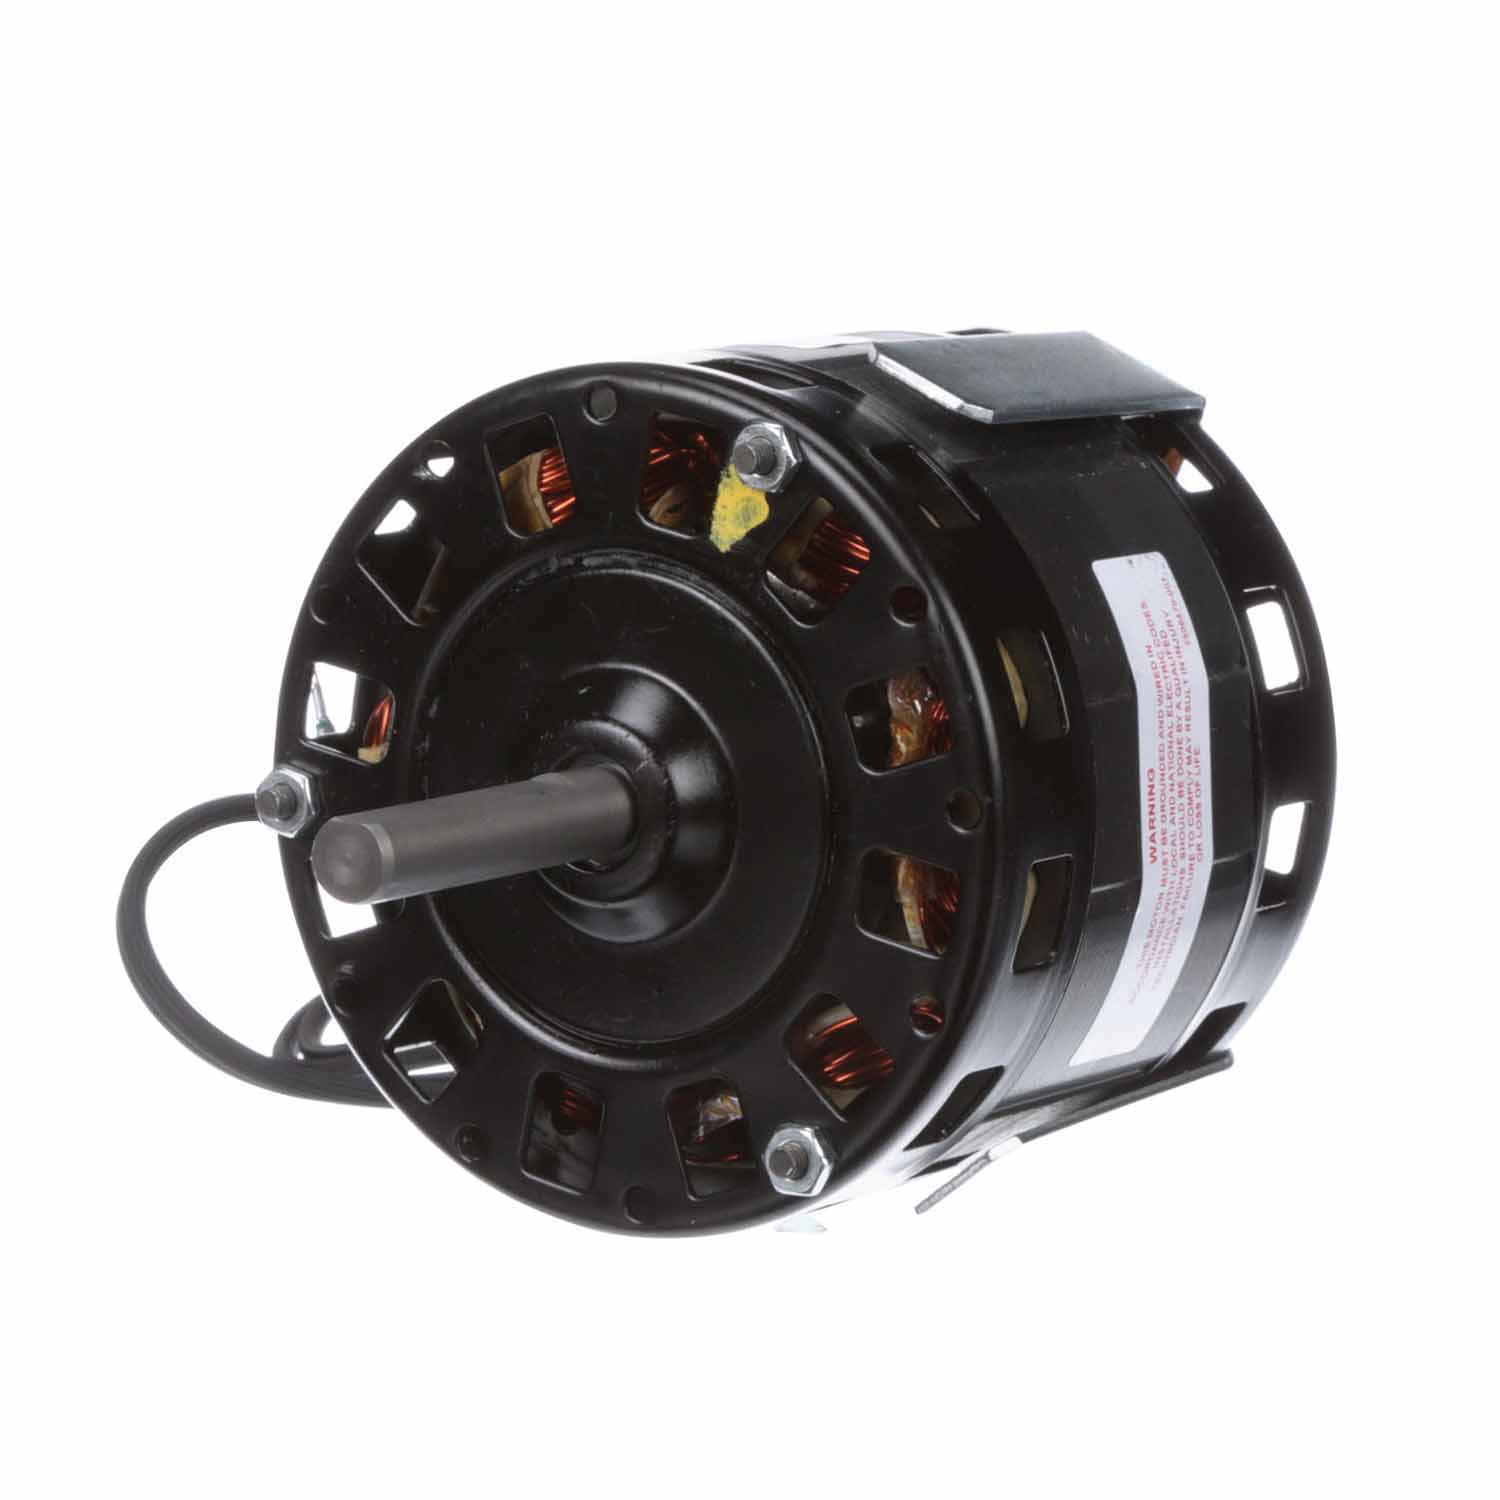 York® S1-7966-311P Furnace Blower Motor, 115 VAC, 7.8 A, 1/6 hp, 900 rpm Speed, 60 Hz, Open Motor Enclosure, 42Y Frame